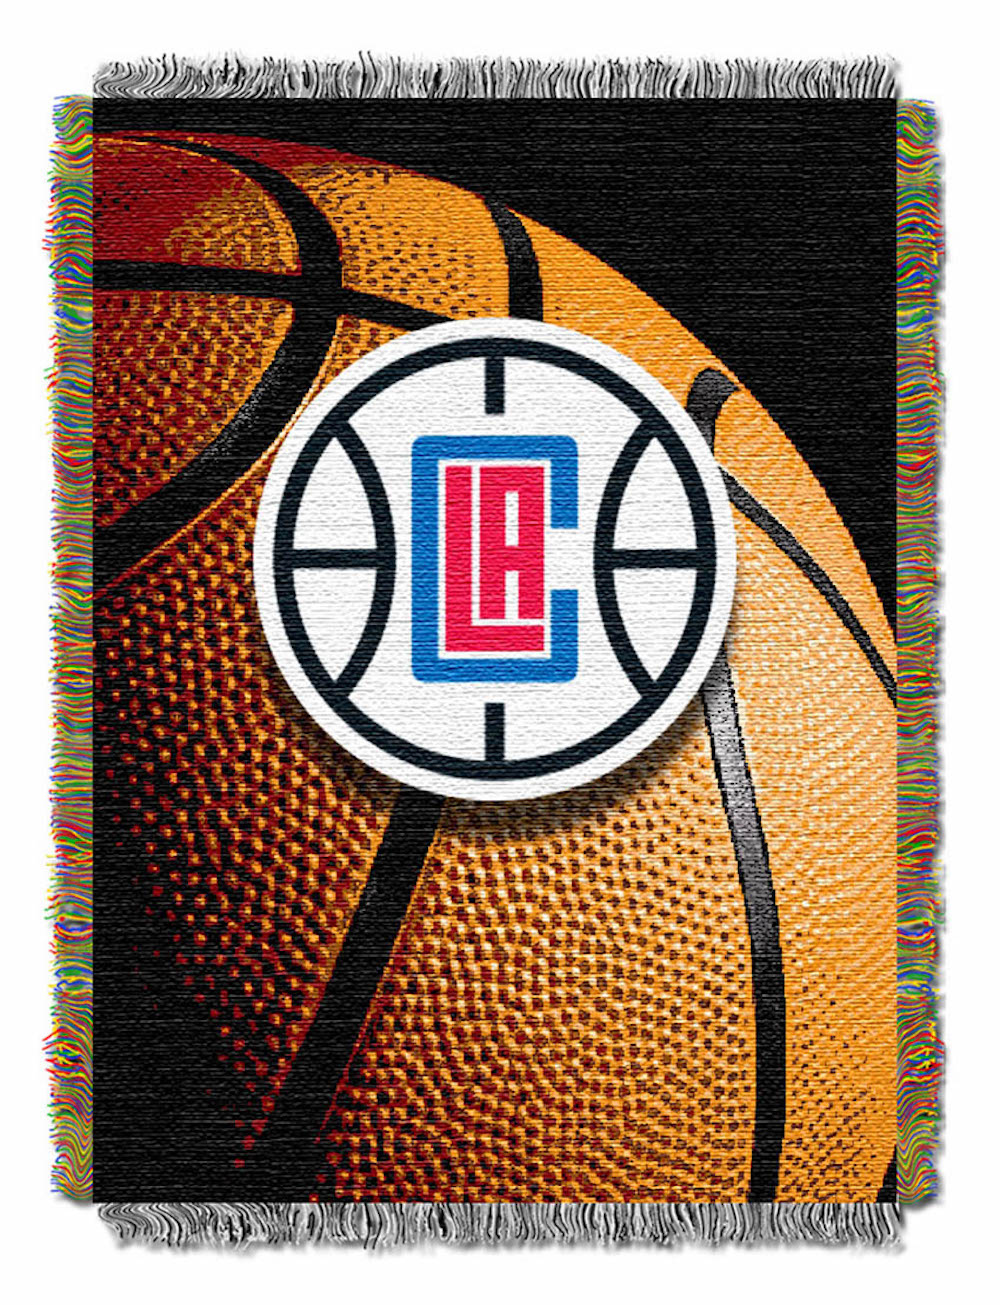 Los Angeles Clippers Real Photo Basketball Tapestry